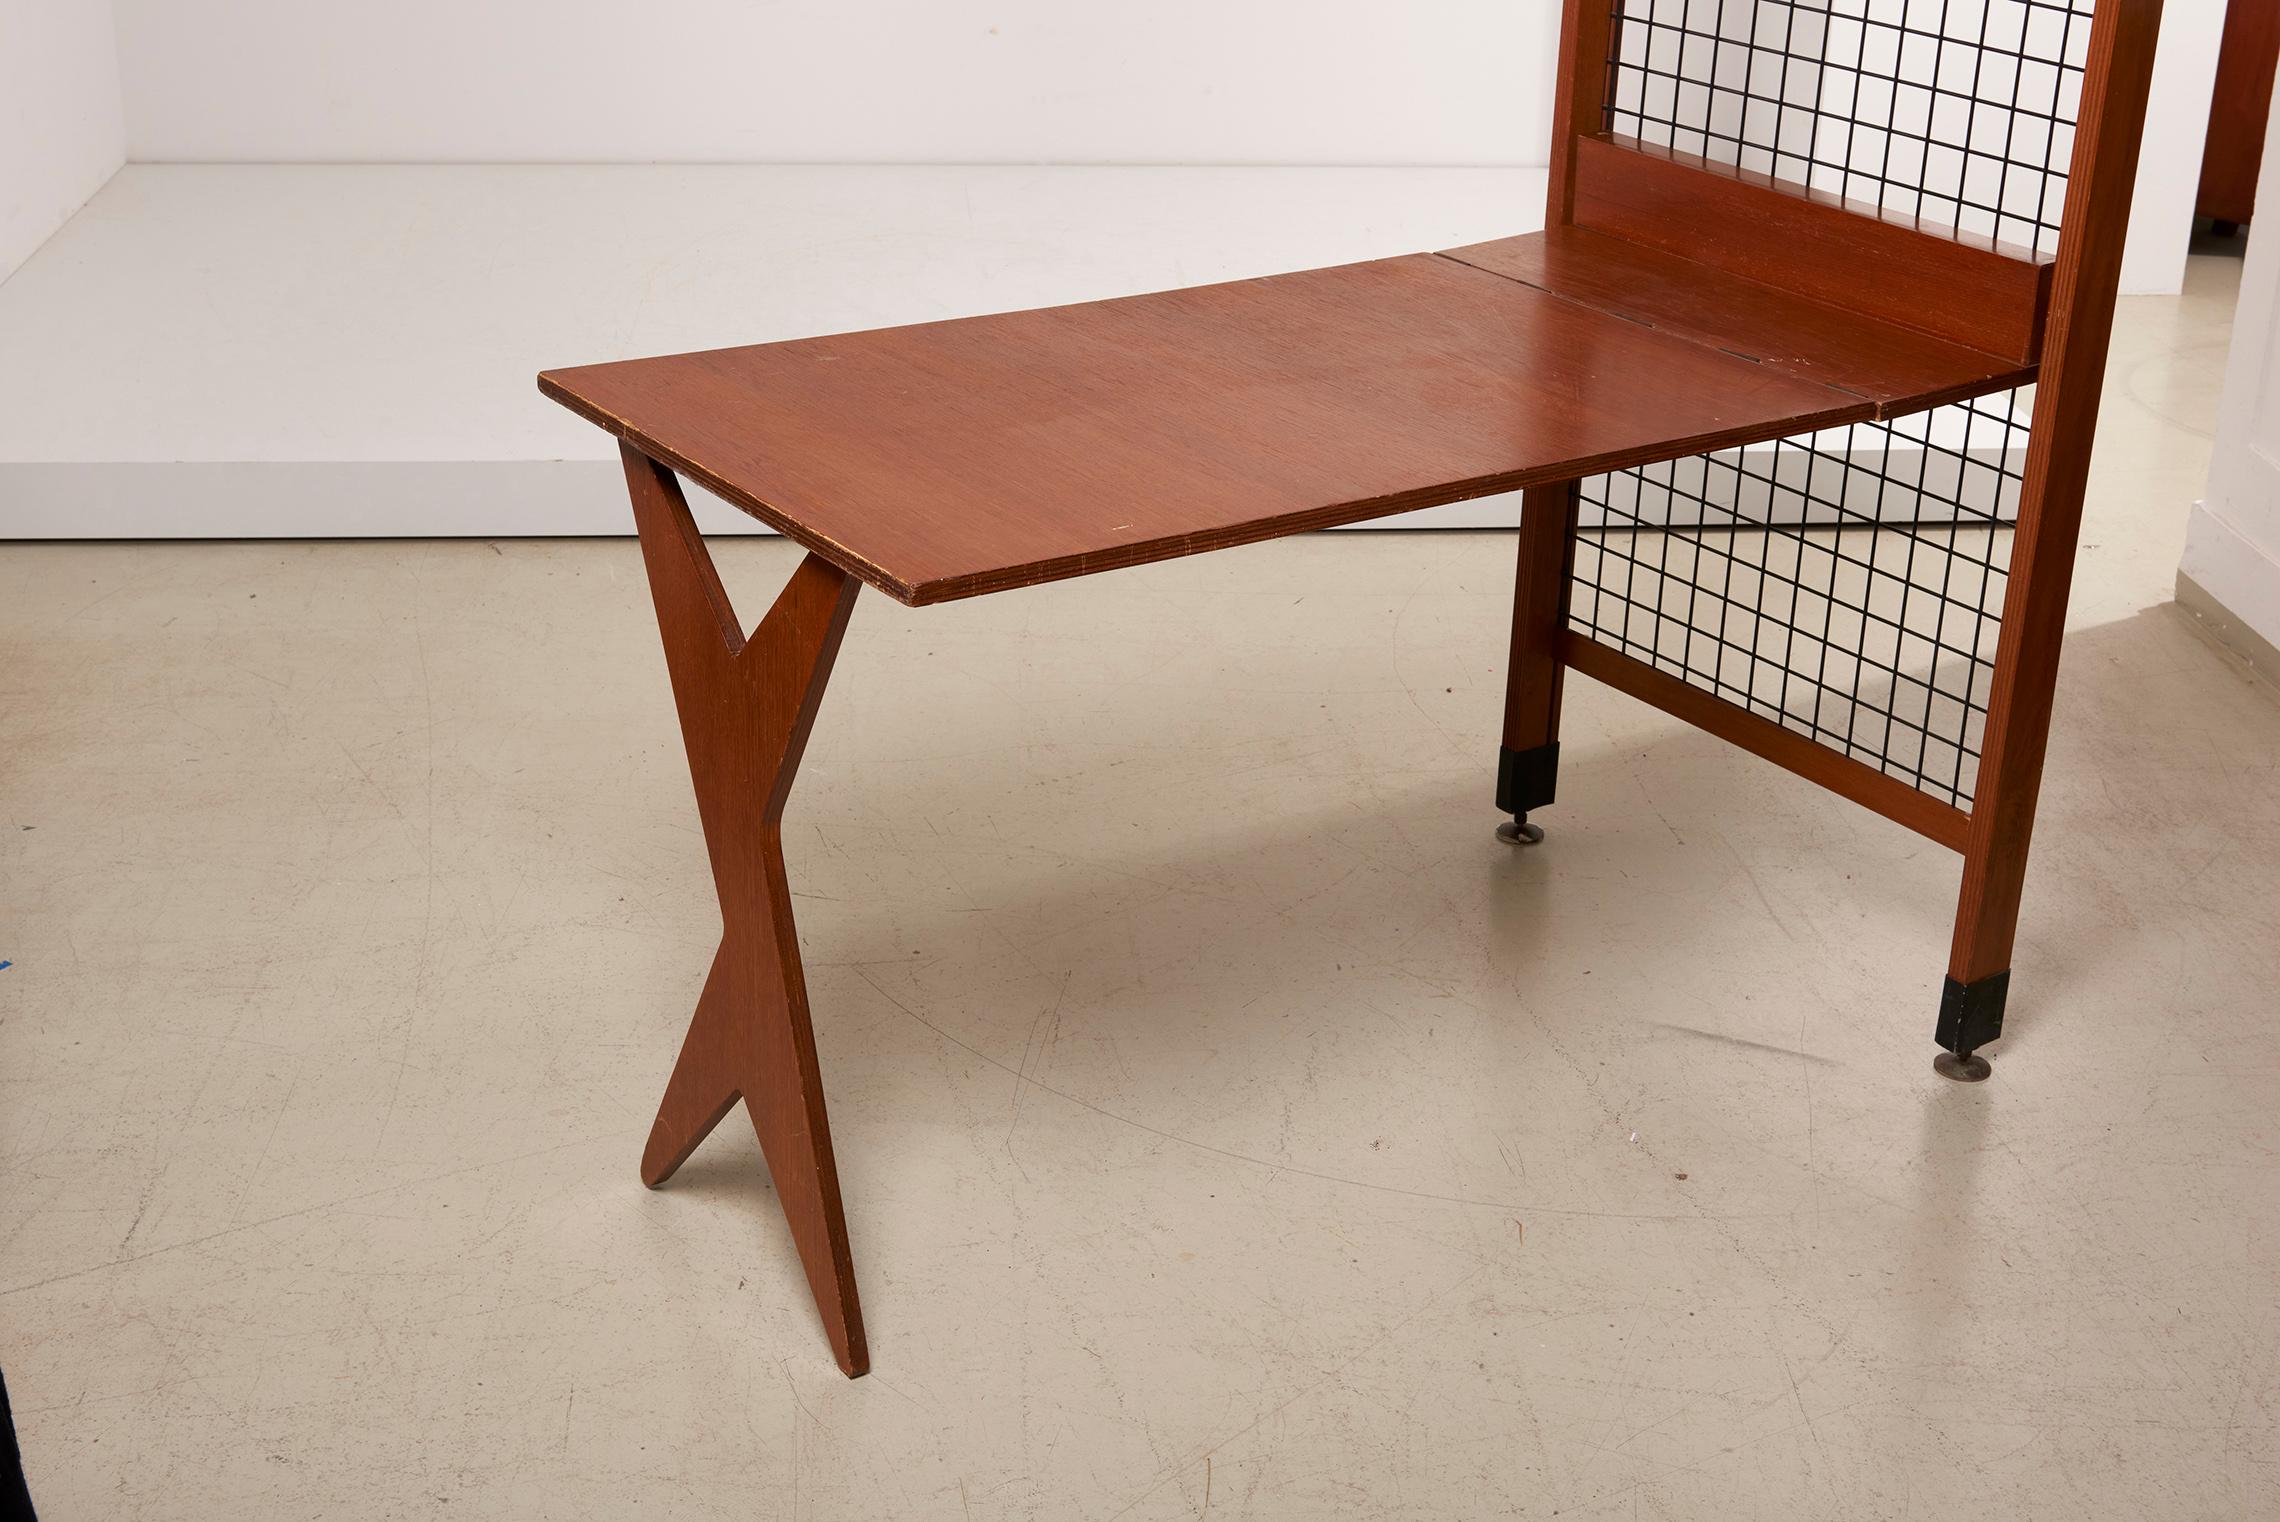 Architectural Desk with Bookshelf, Italy, 1960s For Sale 1